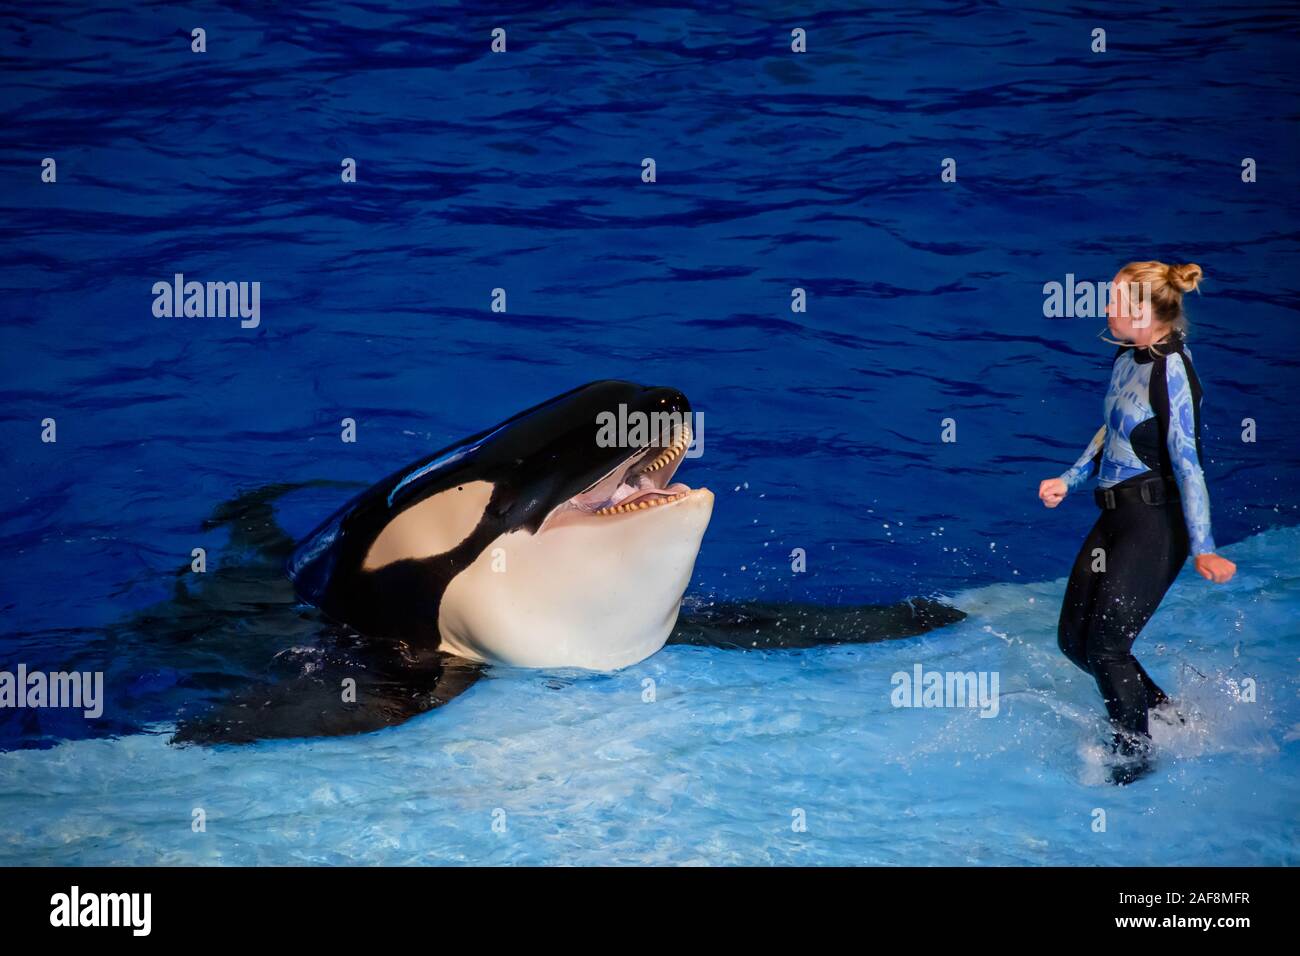 Orlando, Florida. November 16, 2019. Woman trainer feeding a killer whale in Miracle Show at Seaworld Stock Photo